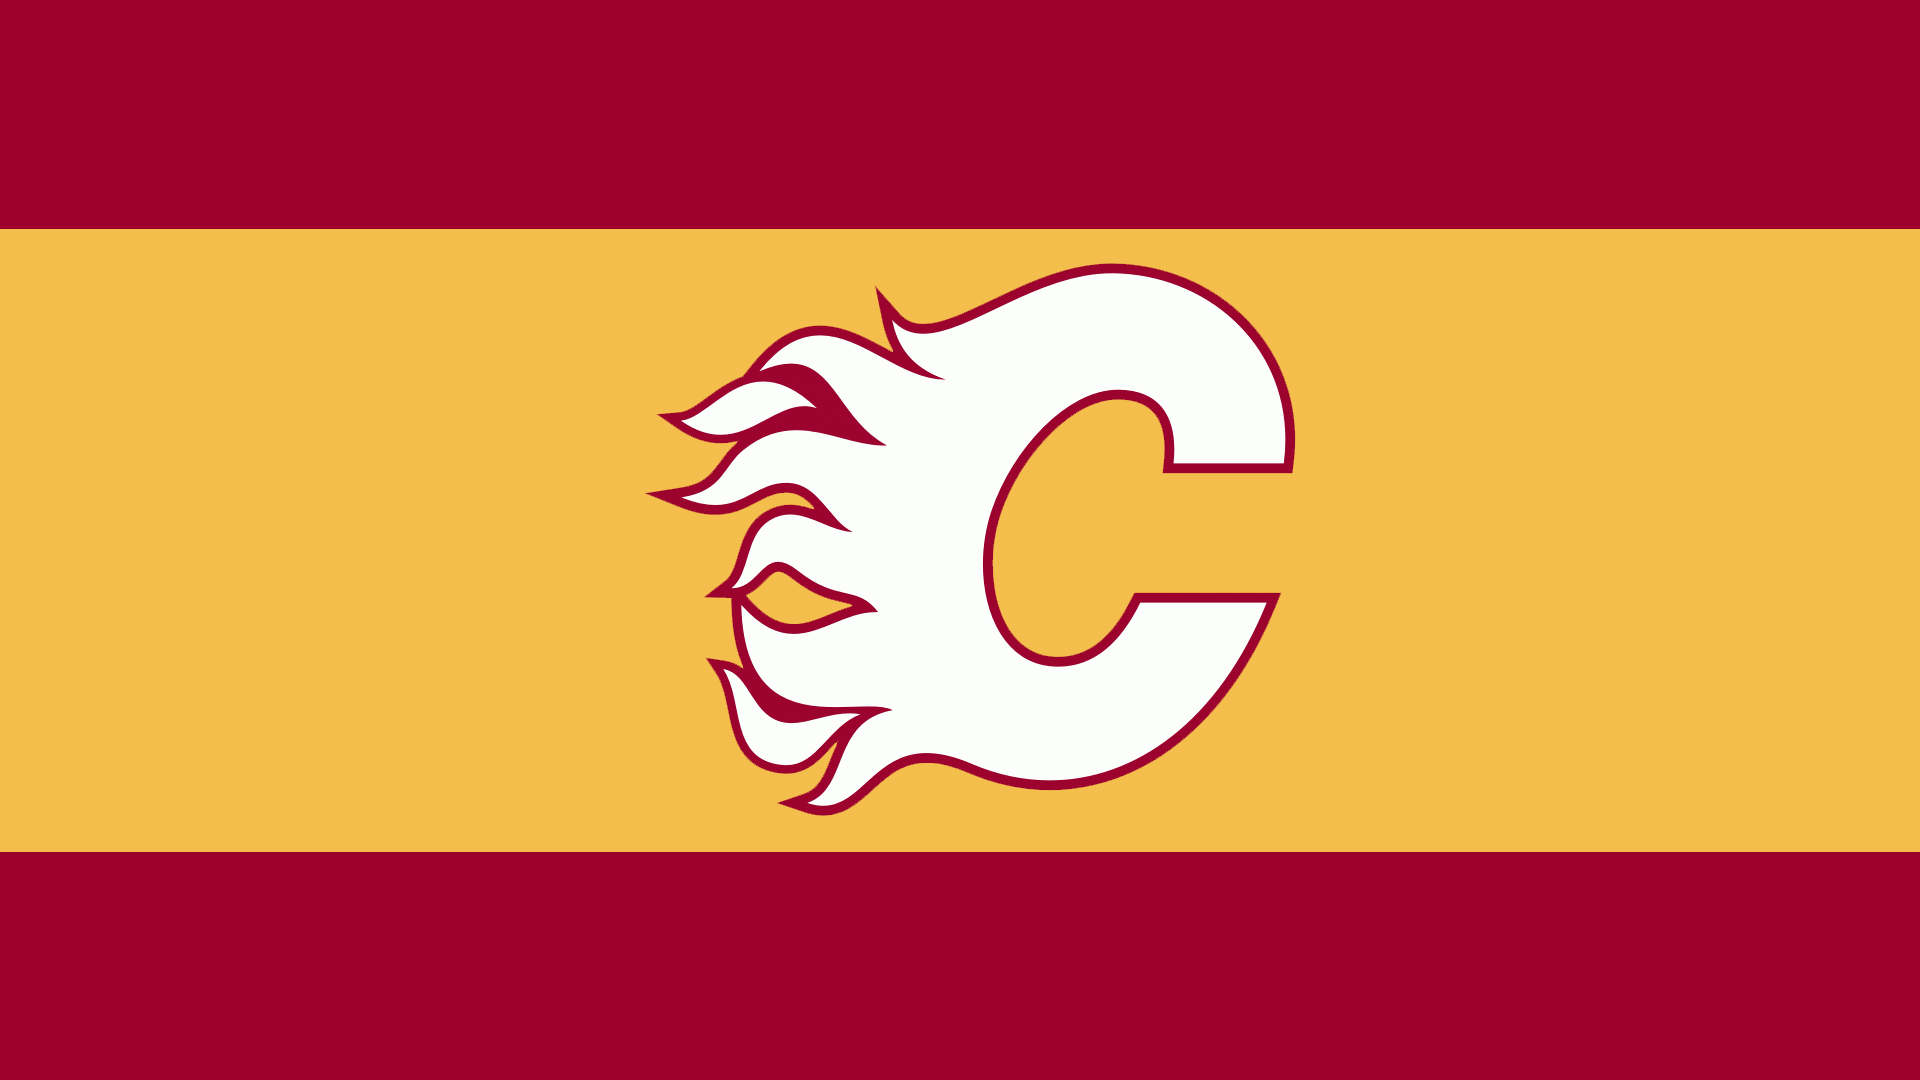 Calgary Flames Desktop Backgrounds wallpapers   General Discussions 1920x1080